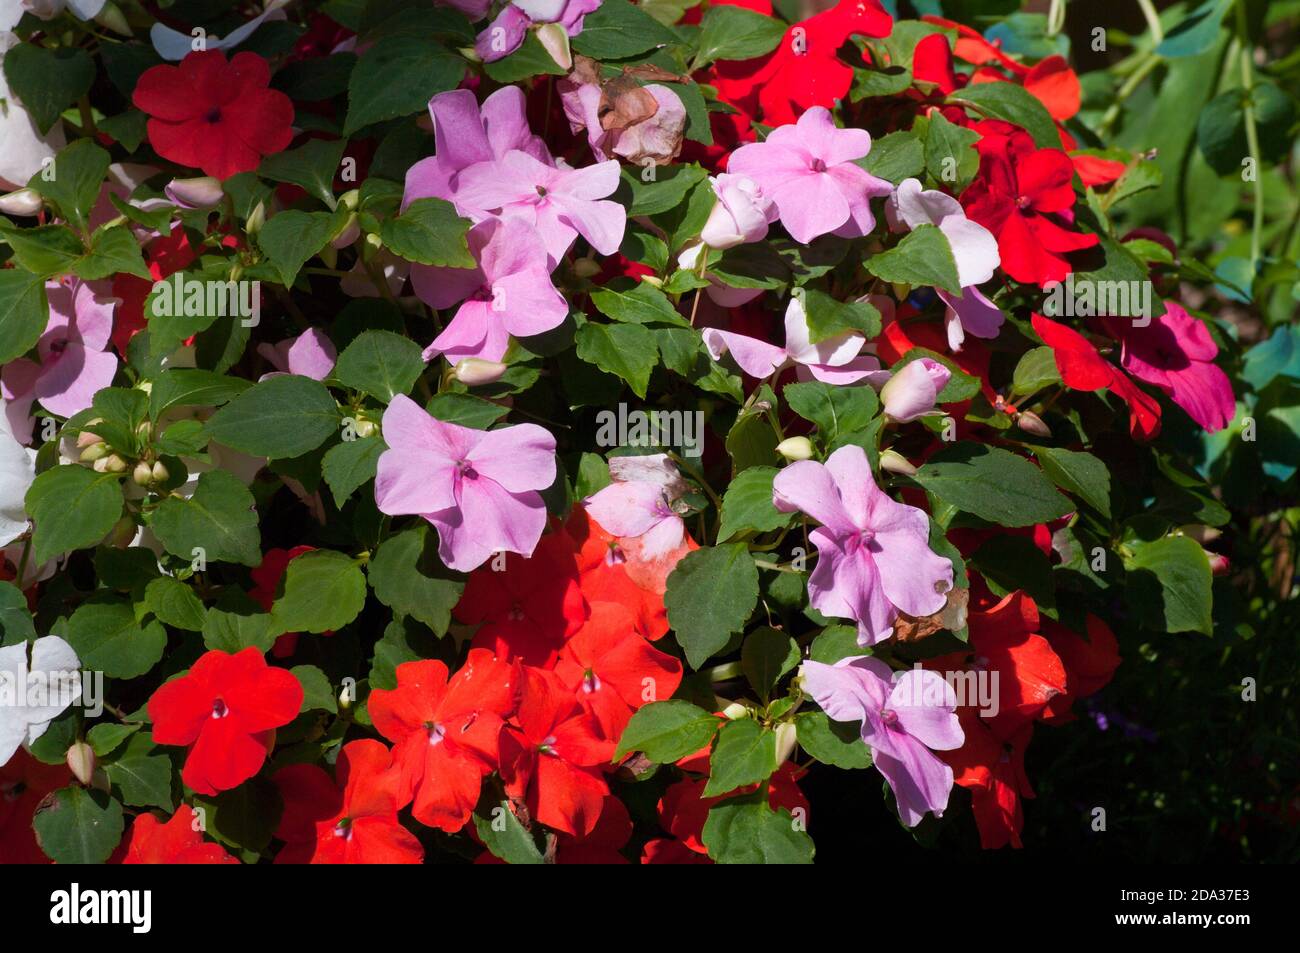 Red and Pink Impatiens Garden Bedding Flowers Stock Photo